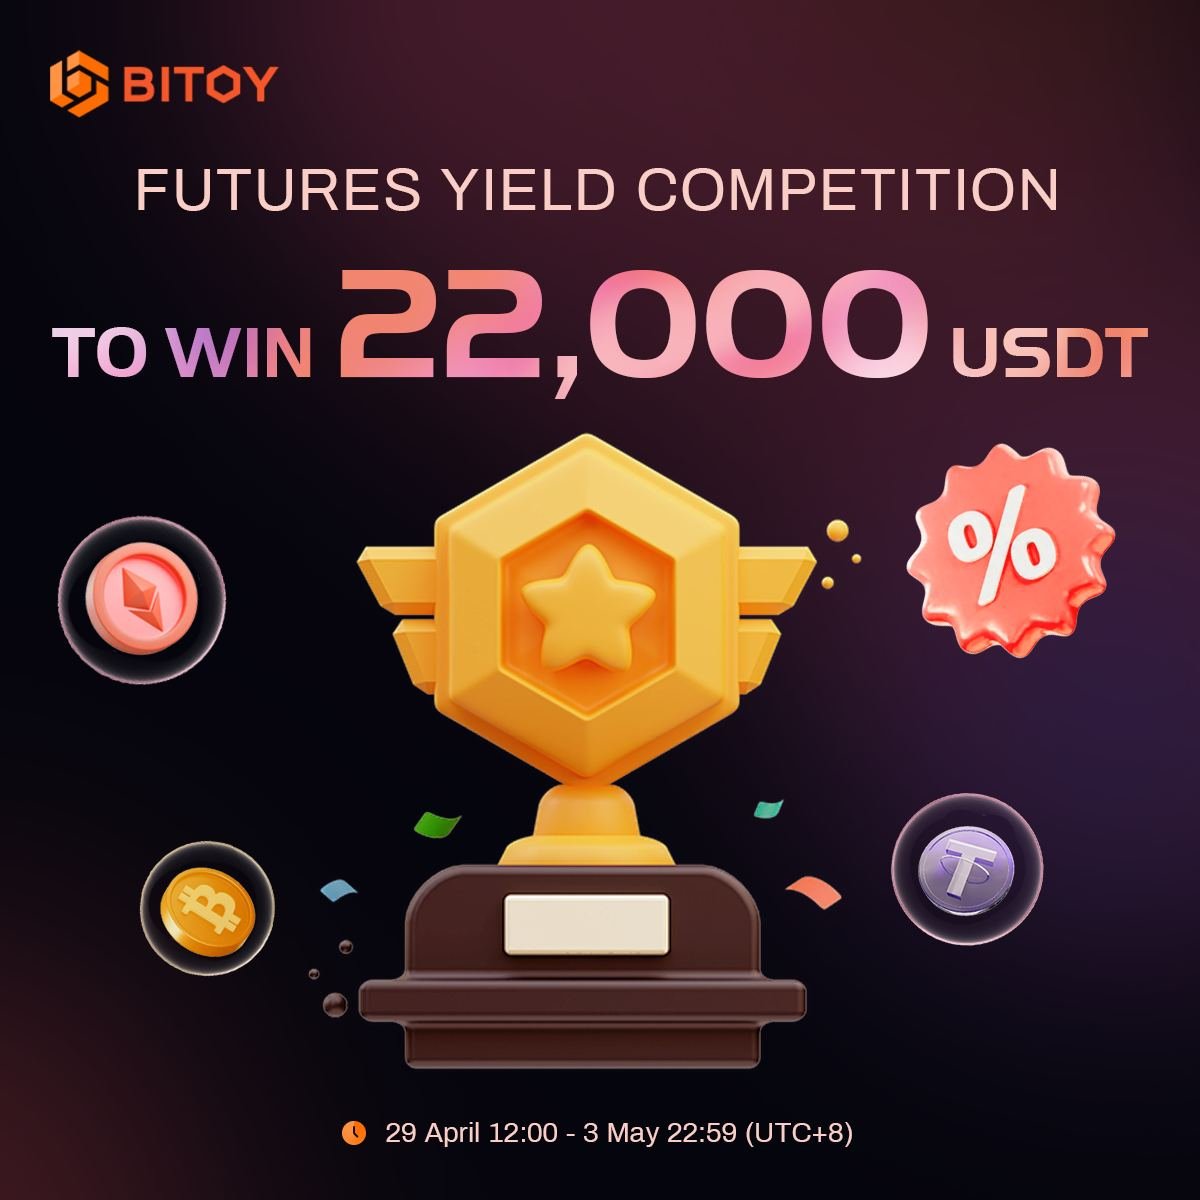 🚀 Join '#Bitoy's Futures Yield Ranking Campaign' for a chance to win up to 22,000 #USDT! 📅 Apr 29 - May 3 👥 Eligibility: Selected Bitoy agents & users ✅ In futures trading only Activity rules apply. 🌟 Details: support.bitoy.com/hc/zh-tw/artic… #Futures #Airdrop #rewards